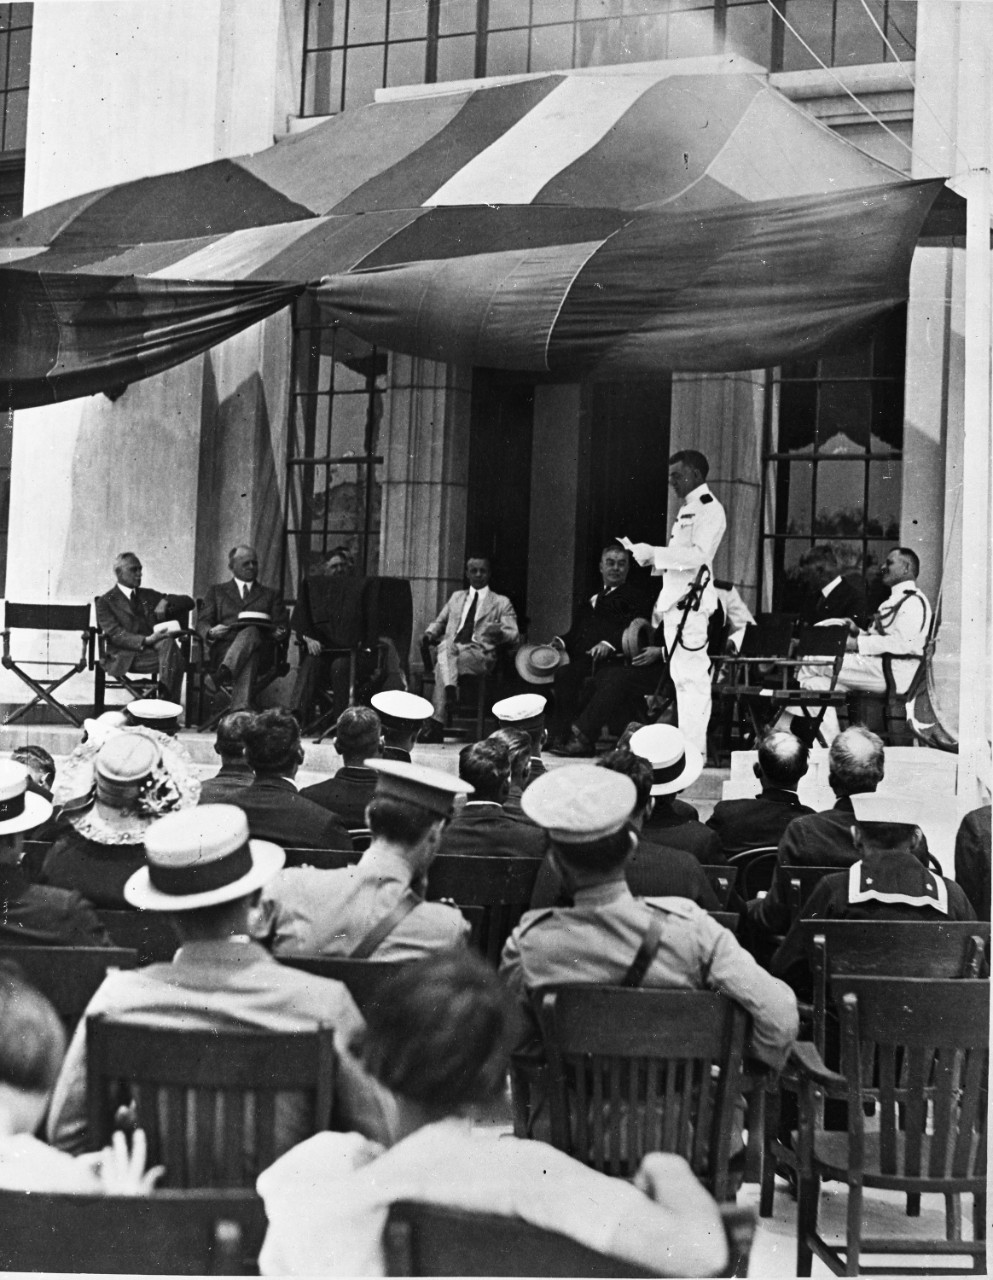 black and white photo of man in uniform on a stage under a tent in front of a seated audience.